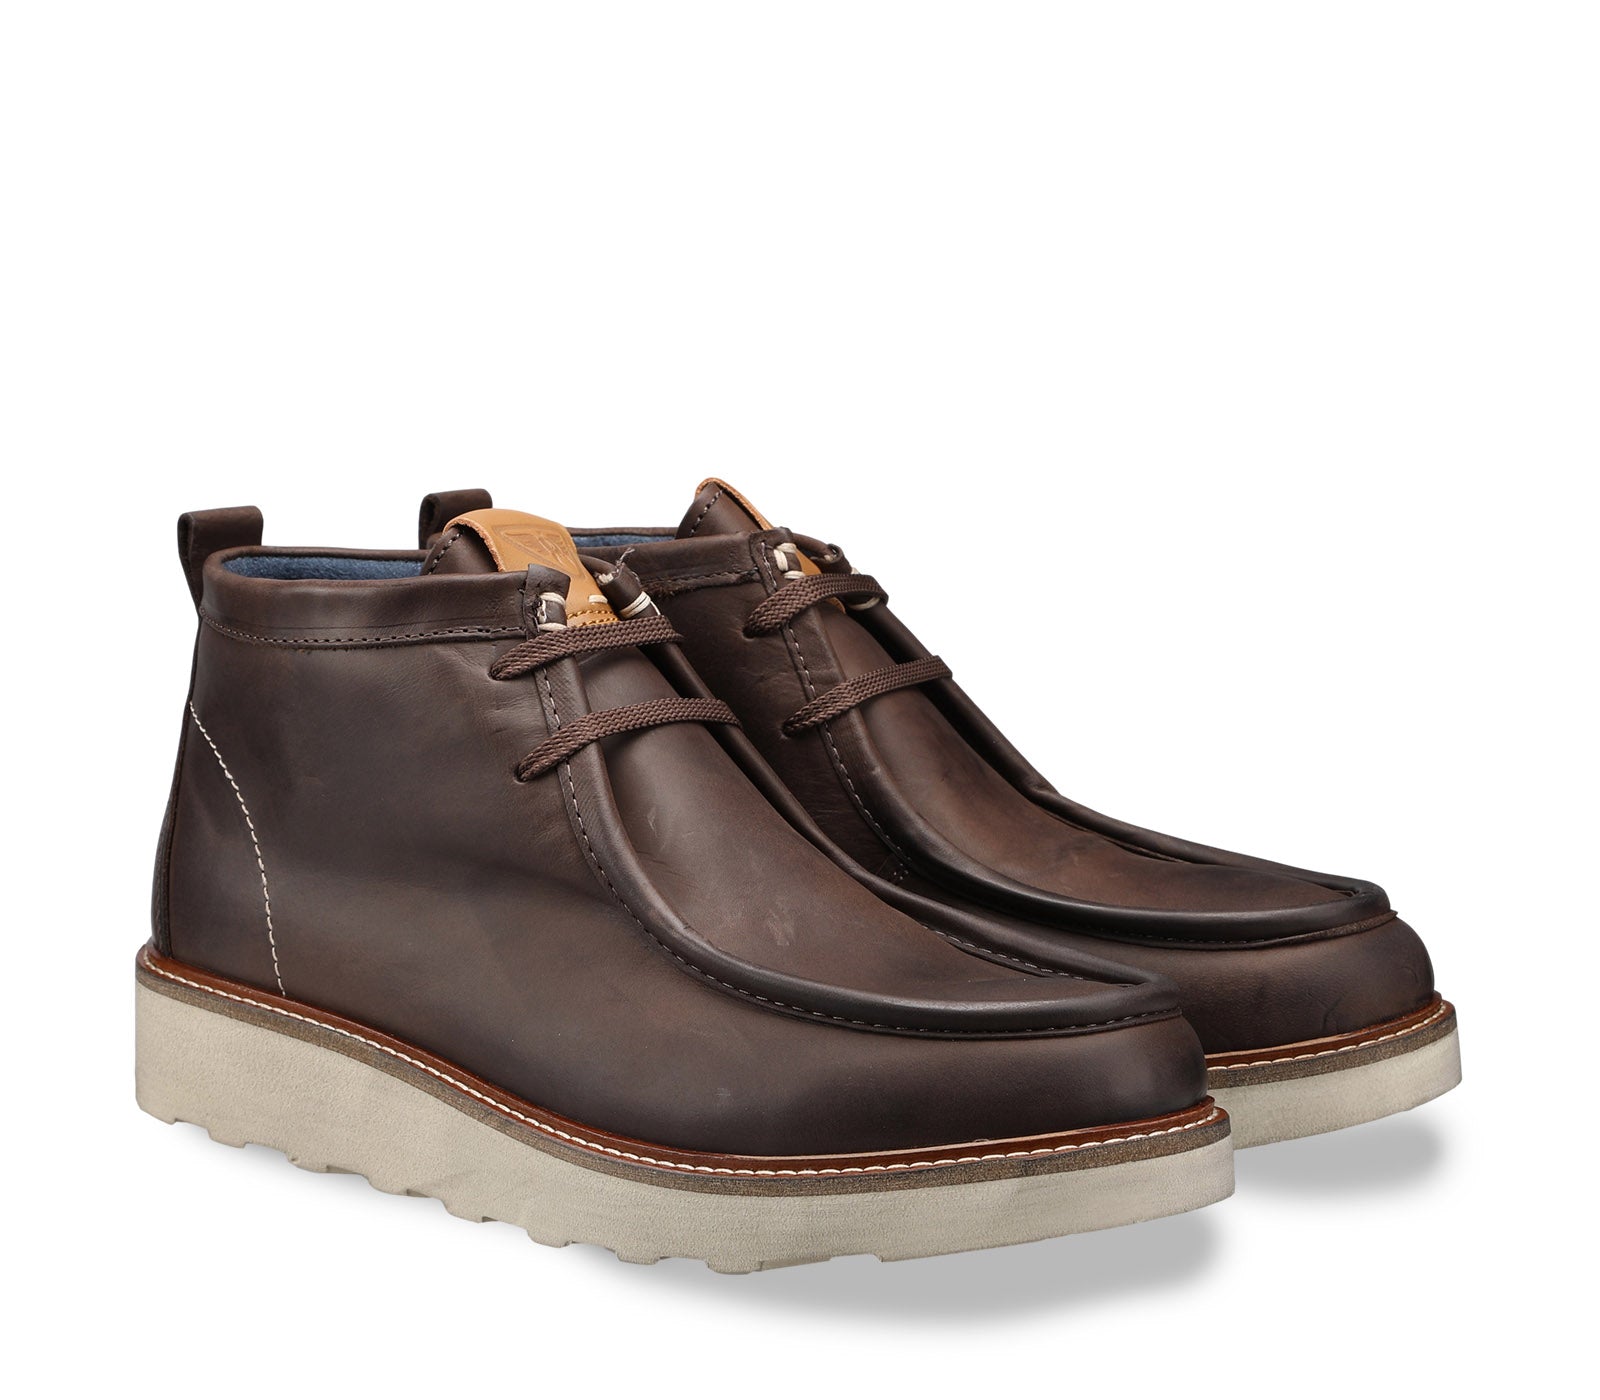 Men's brown leather lace-up boot